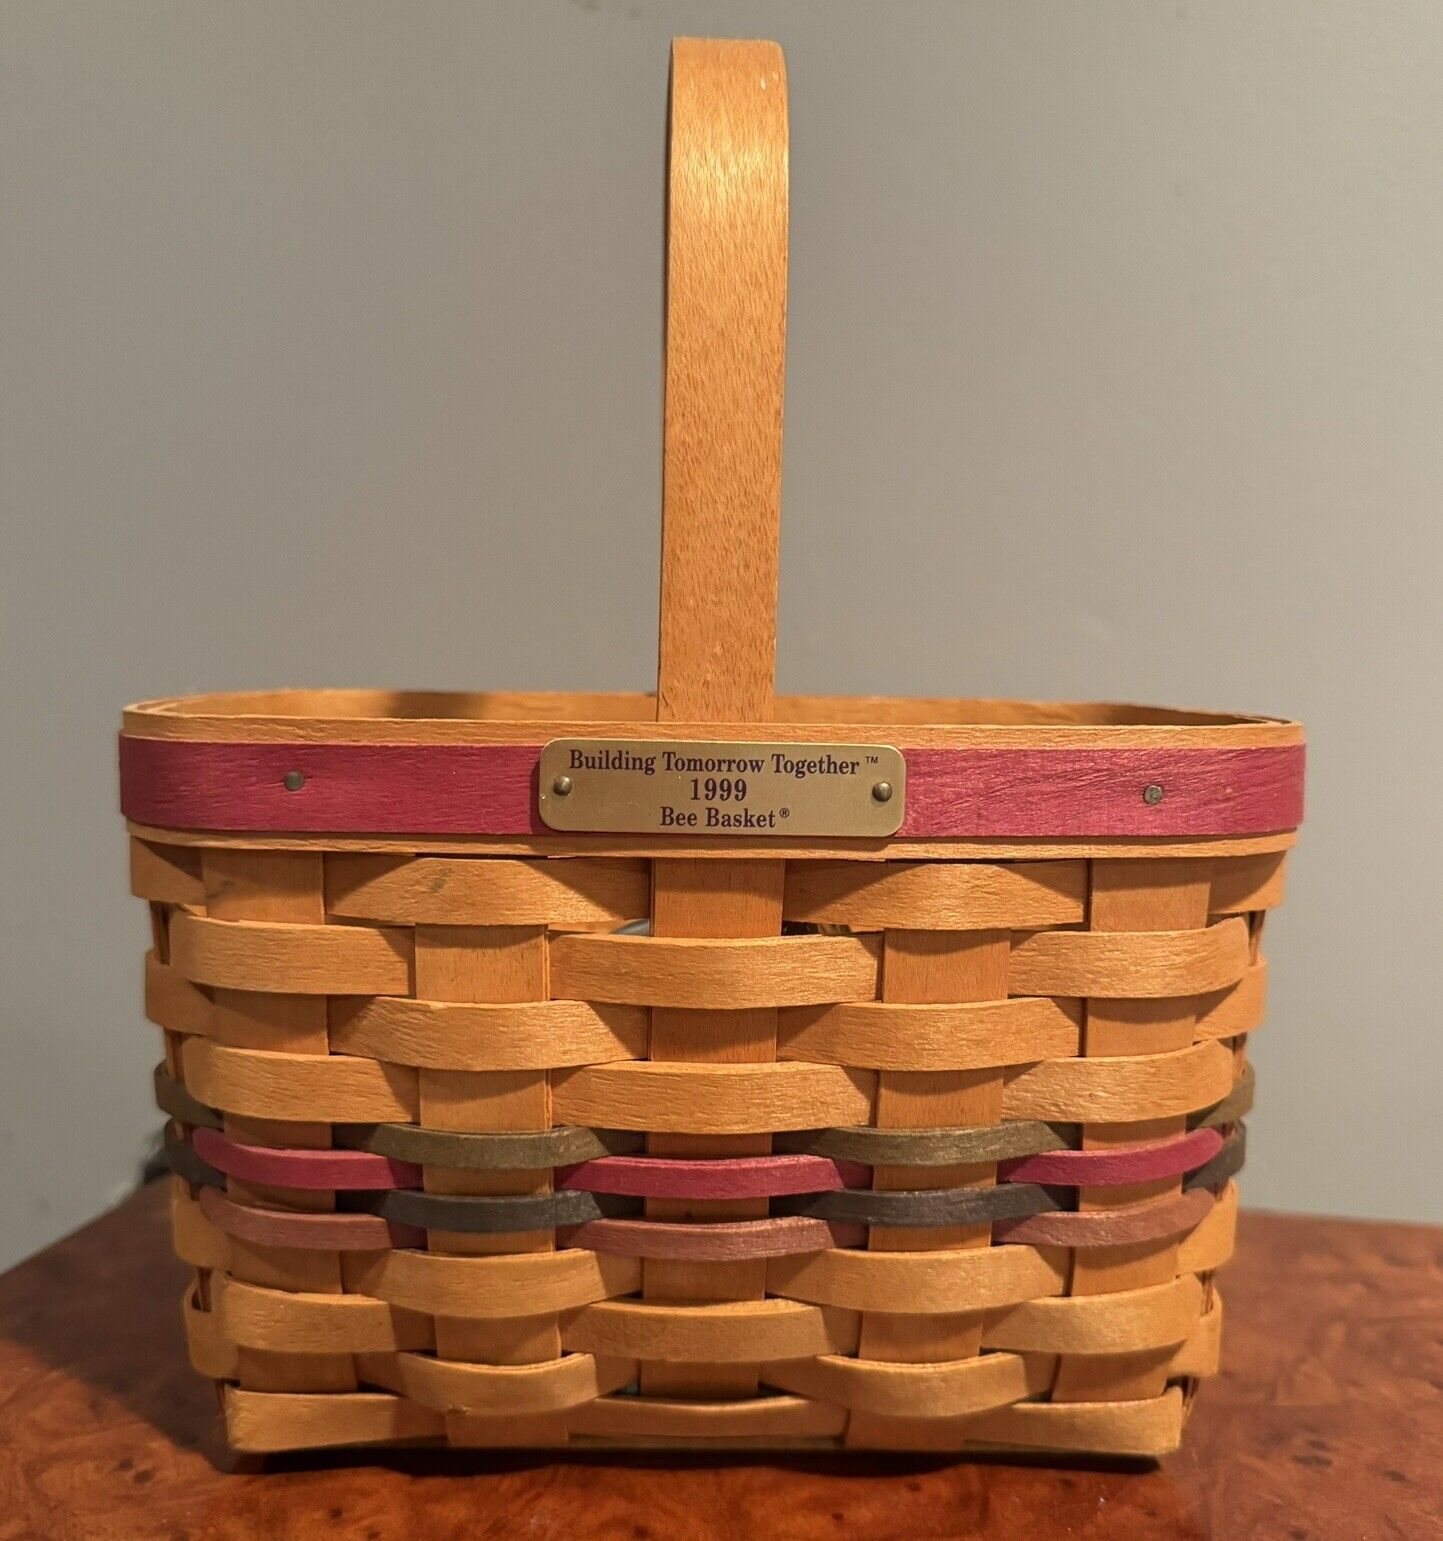 Longaberger 1999 Signed Bee Basket Building Tomorrow Together Multicolored USA